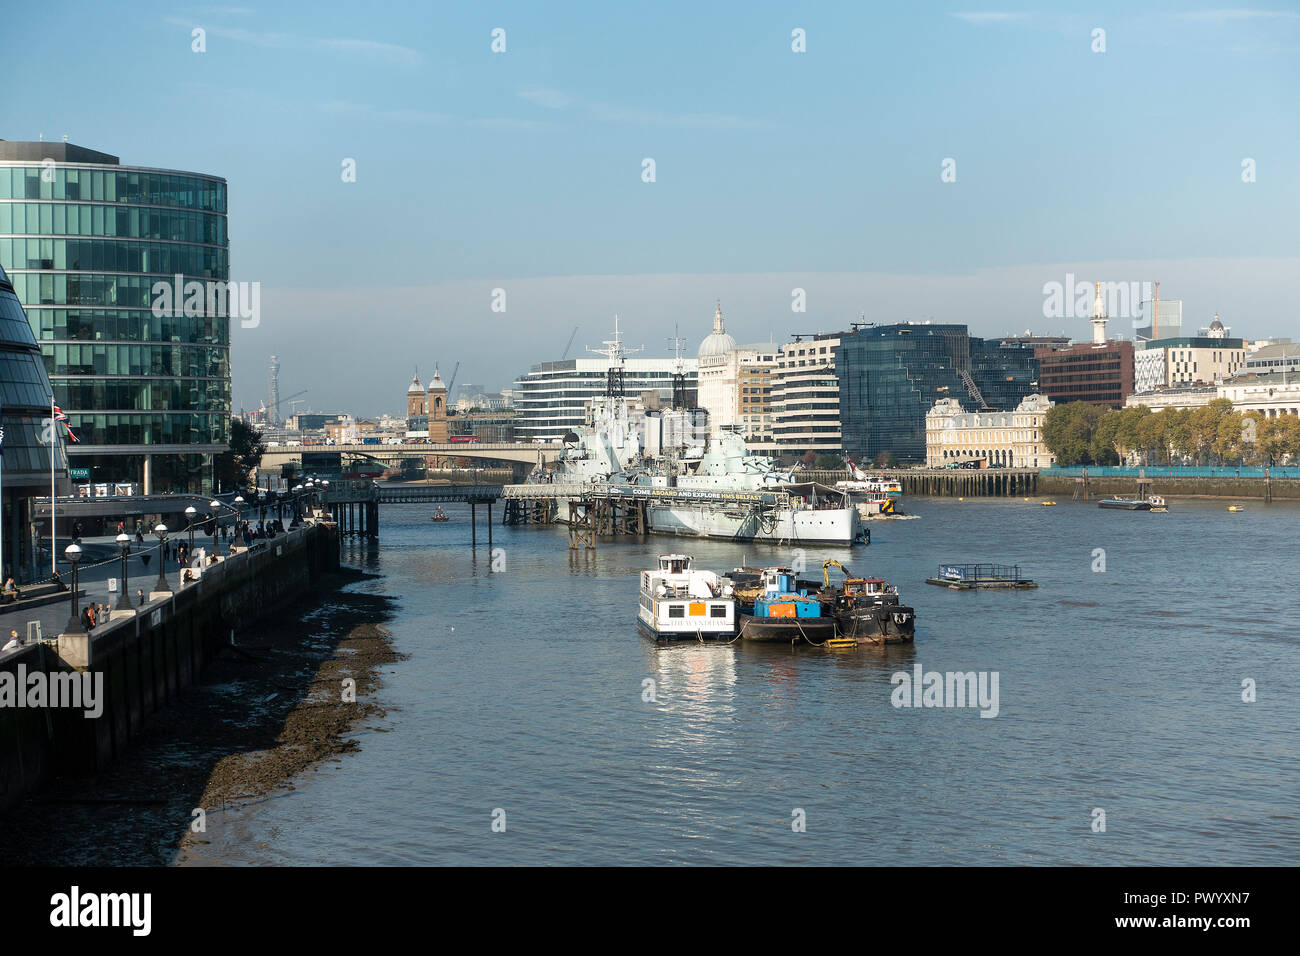 The Royal Navy WWII Light Cruiser HMS Belfast Moored in the River Thames near Southwark City of London England United Kingdom UK Stock Photo